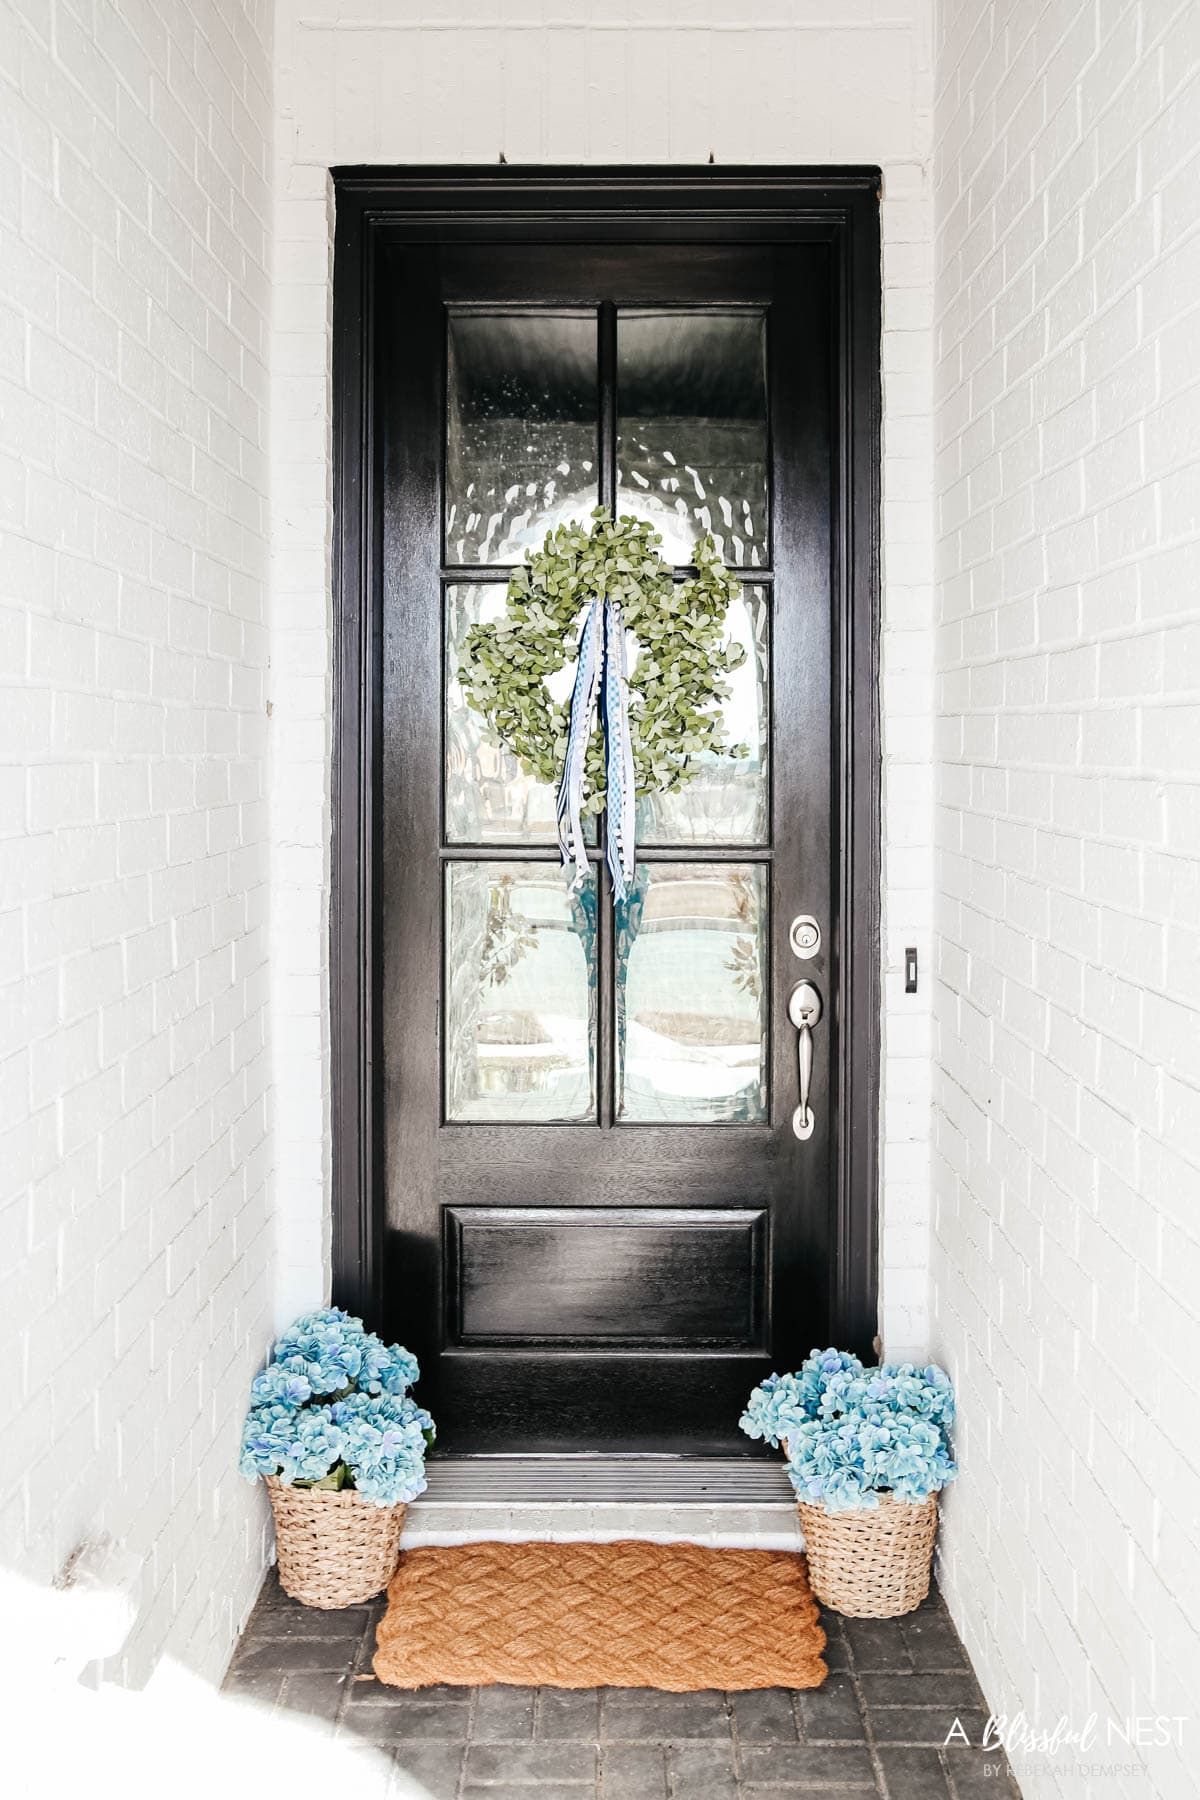 Dark espresso colored front door with eucalyptus wreath with shades of blue ribbon attached to the top, baskets on either side of the door filled with blue hydrangeas